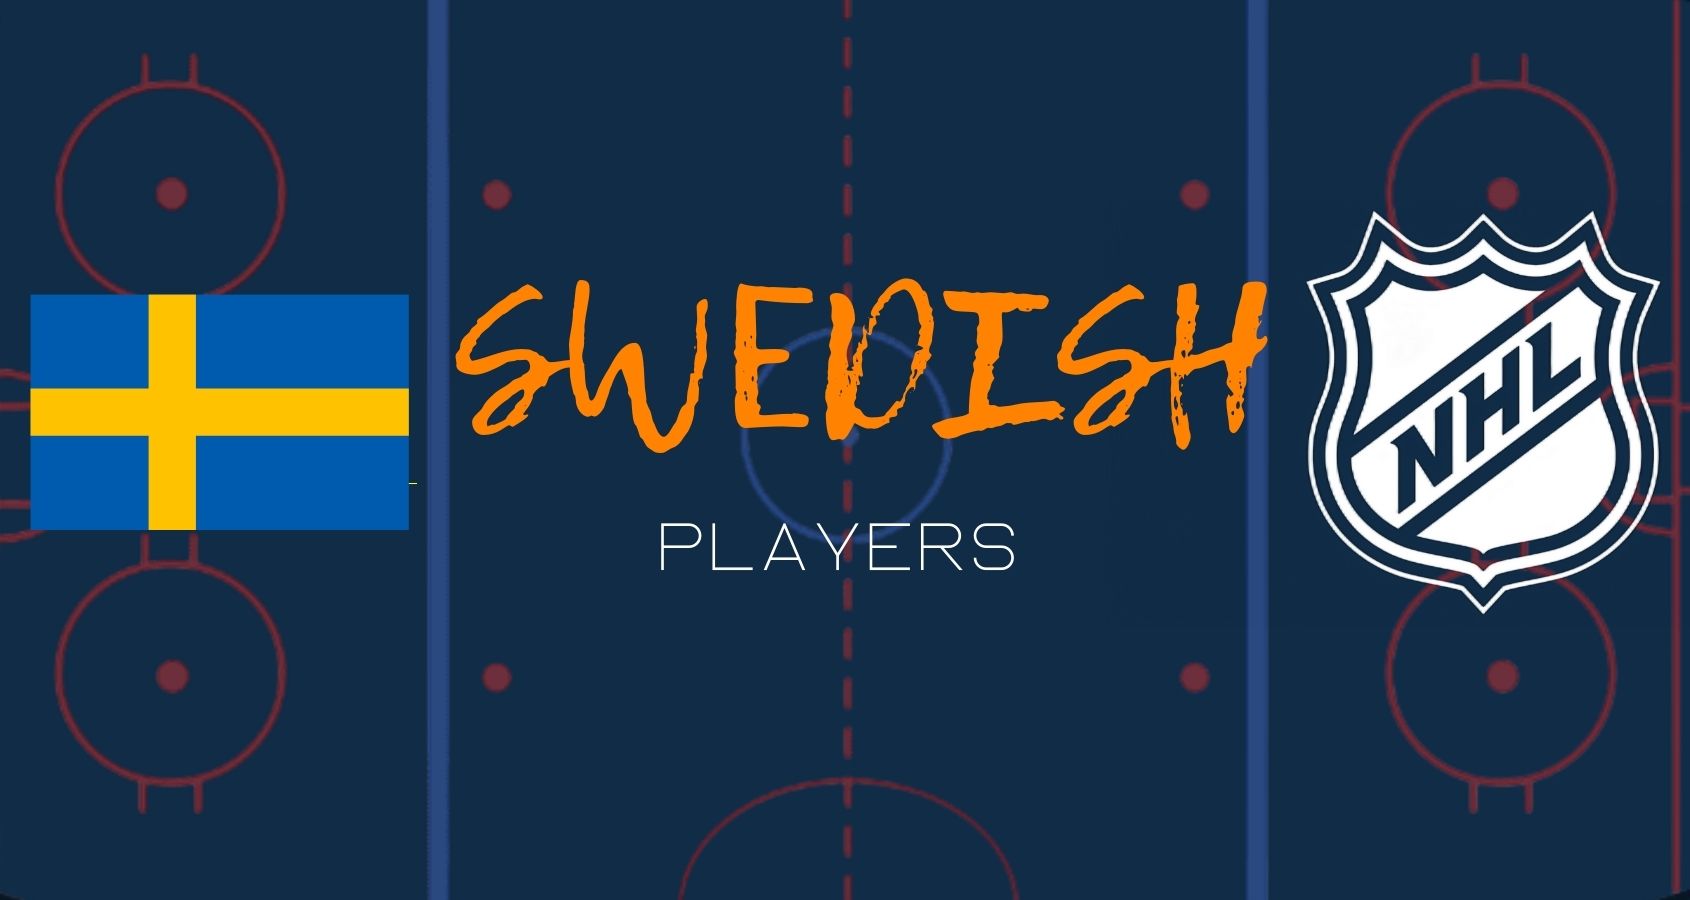 Why Swedish Players are popular in NHL League